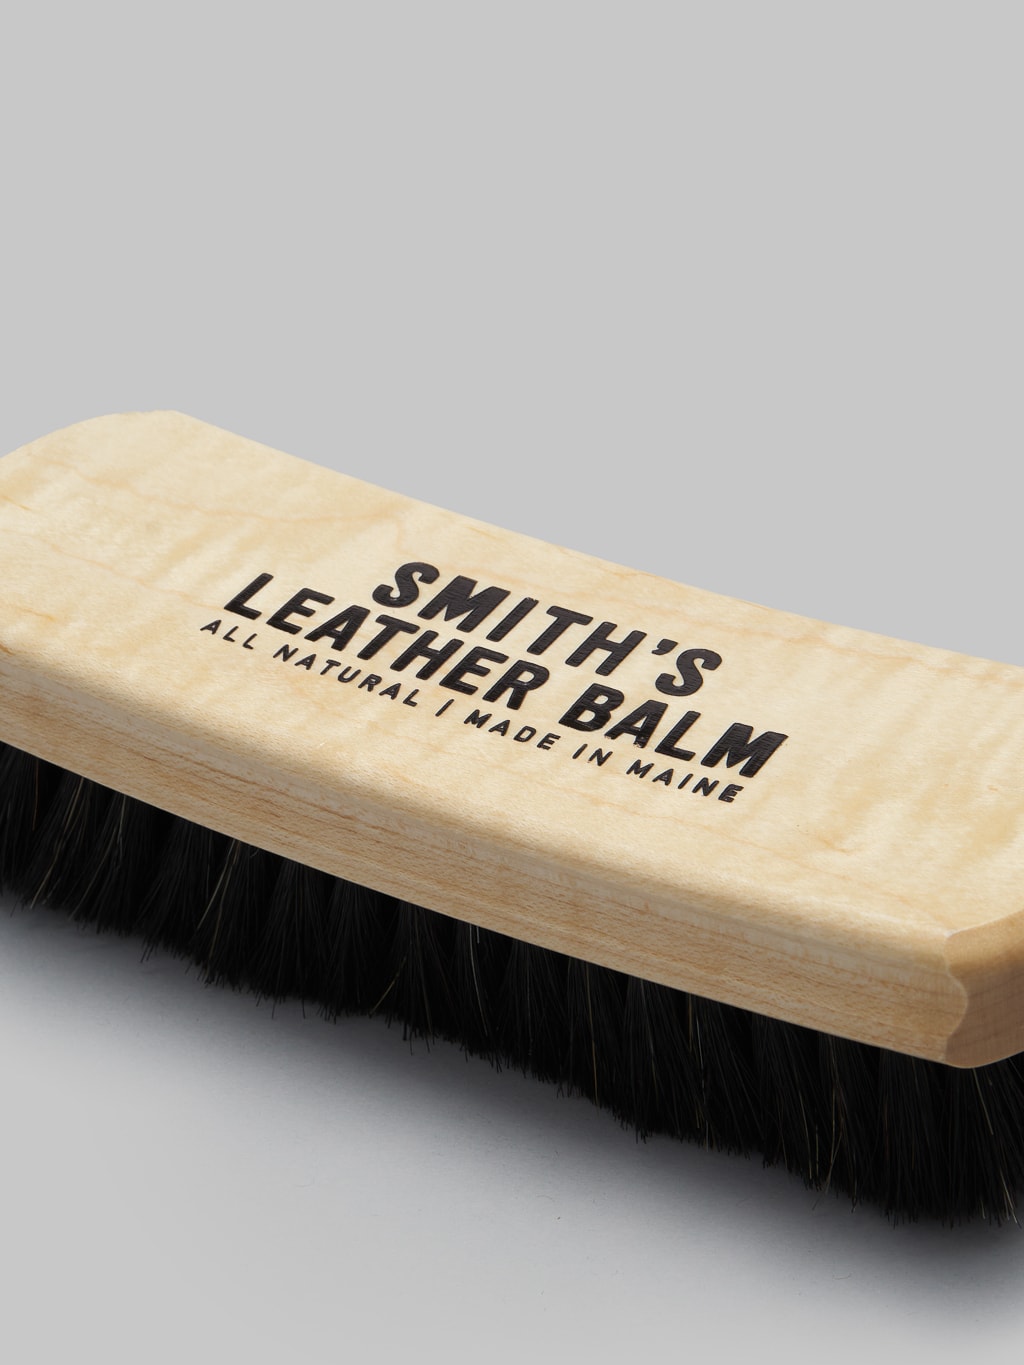 Smith s Leather Balm Horse Hair Brush made in maine